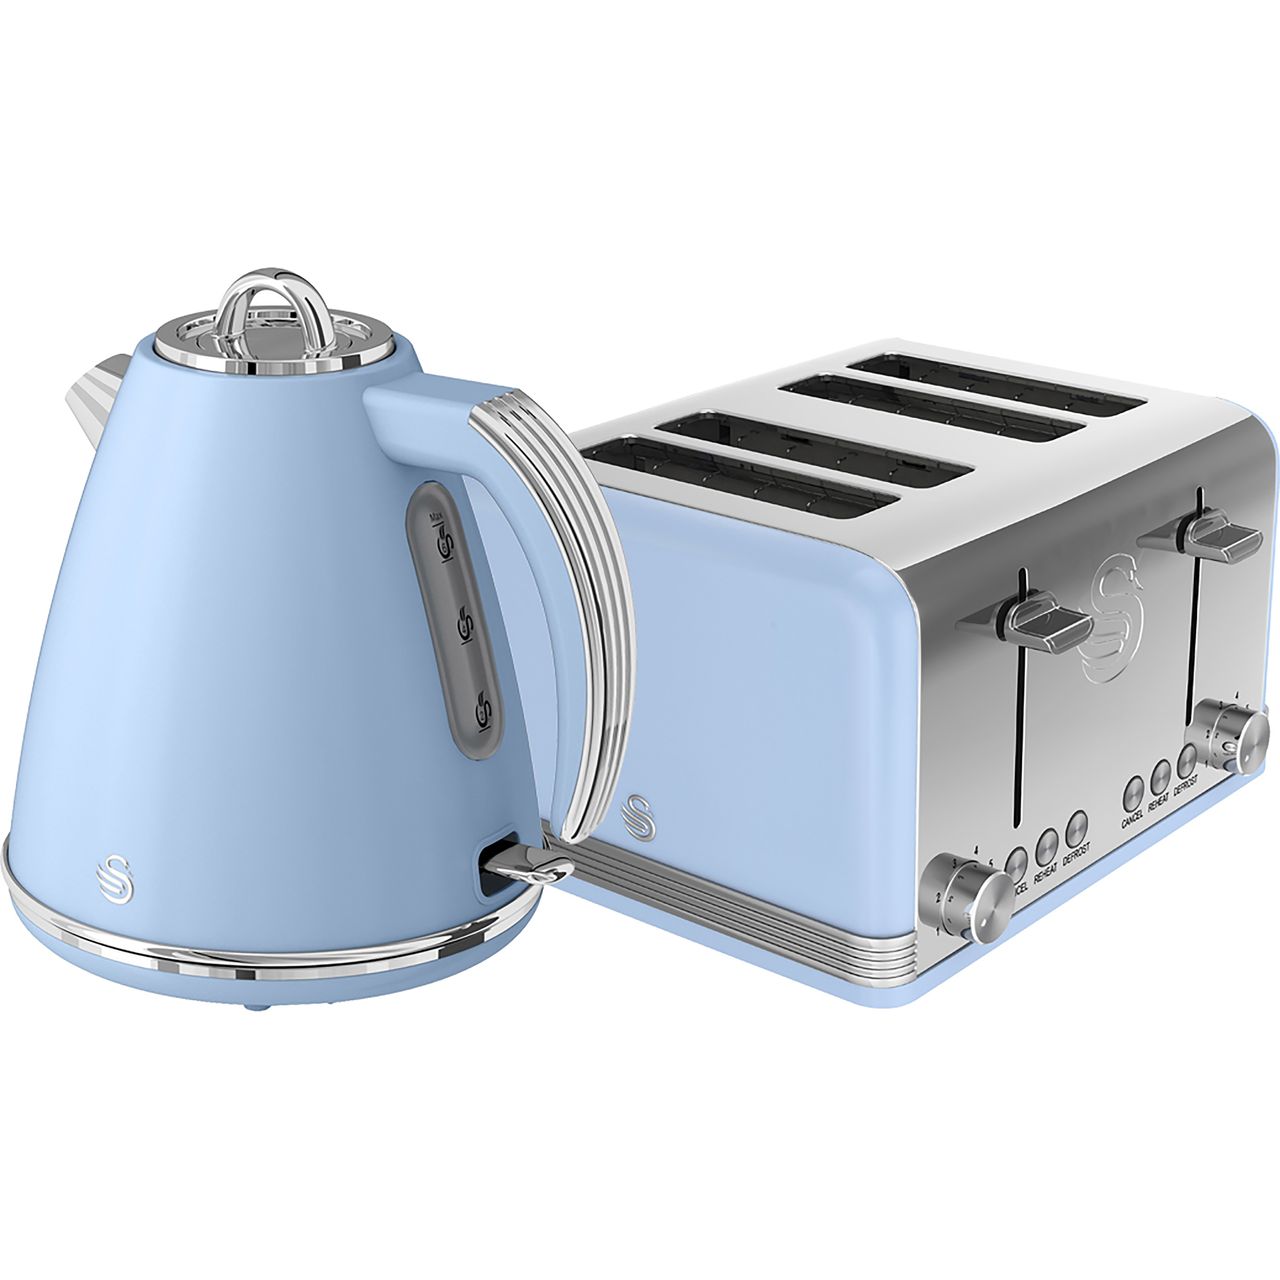 Swan Retro STP7041BLN Kettle And Toaster Sets Review